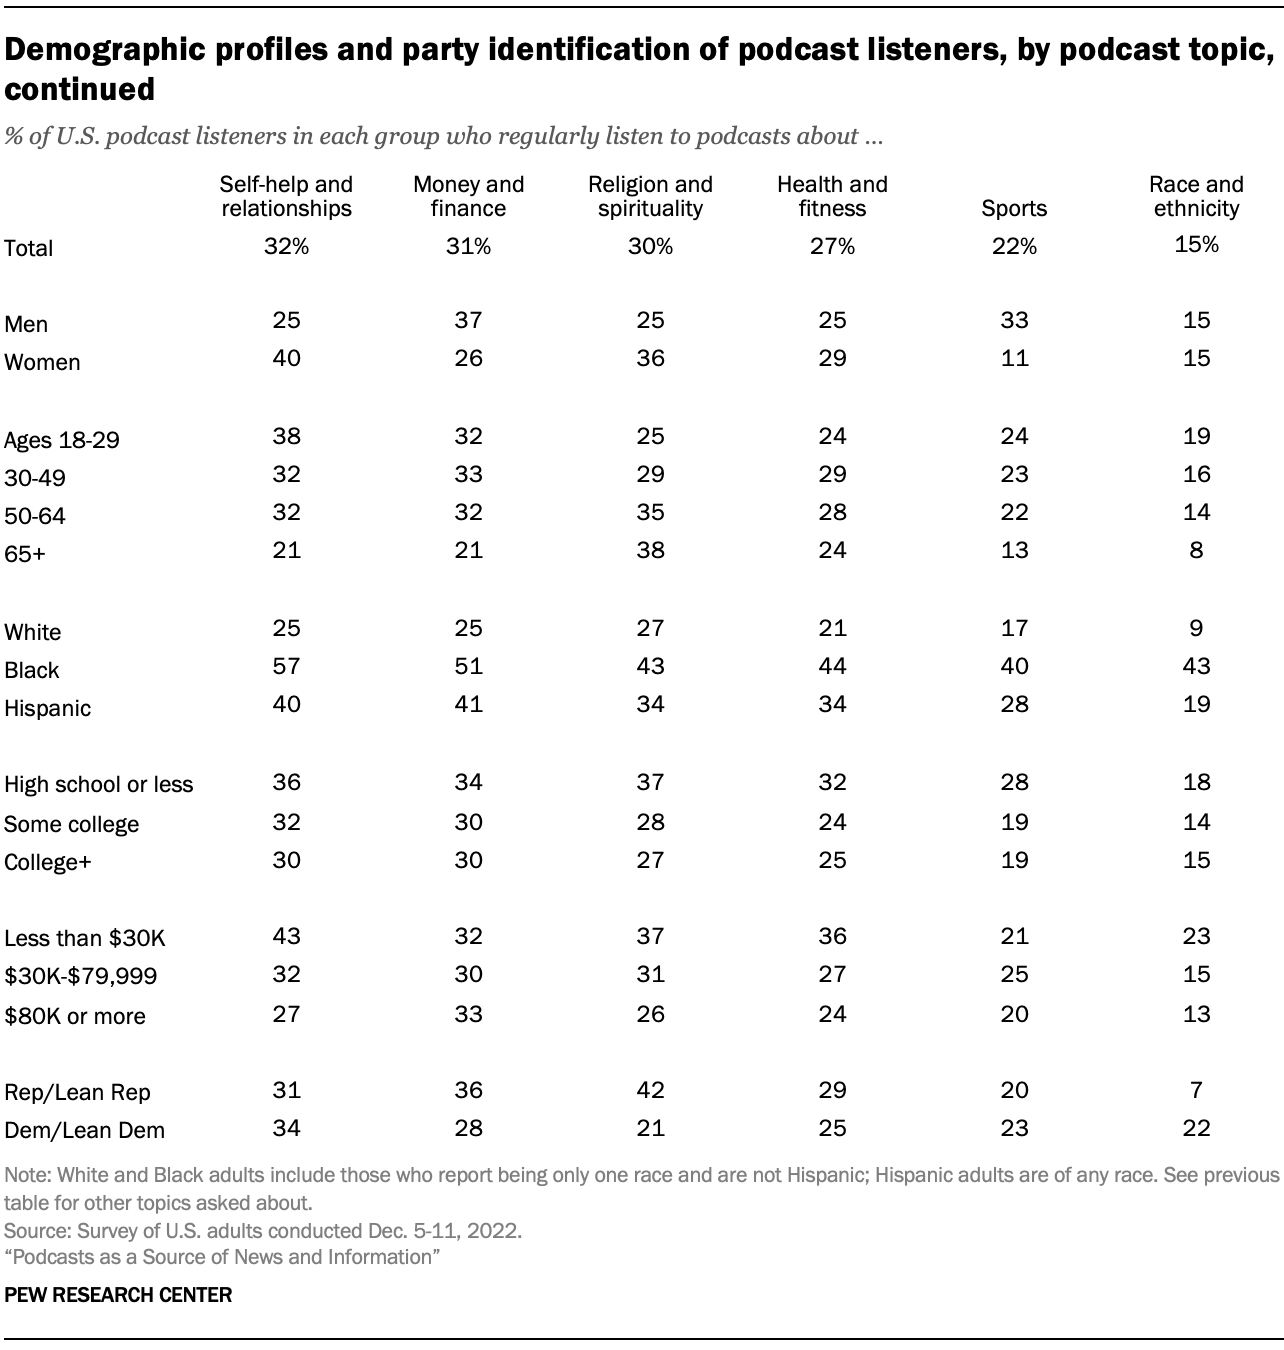 A table showing Demographic profiles and party identification of podcast listeners, by podcast topic, continued